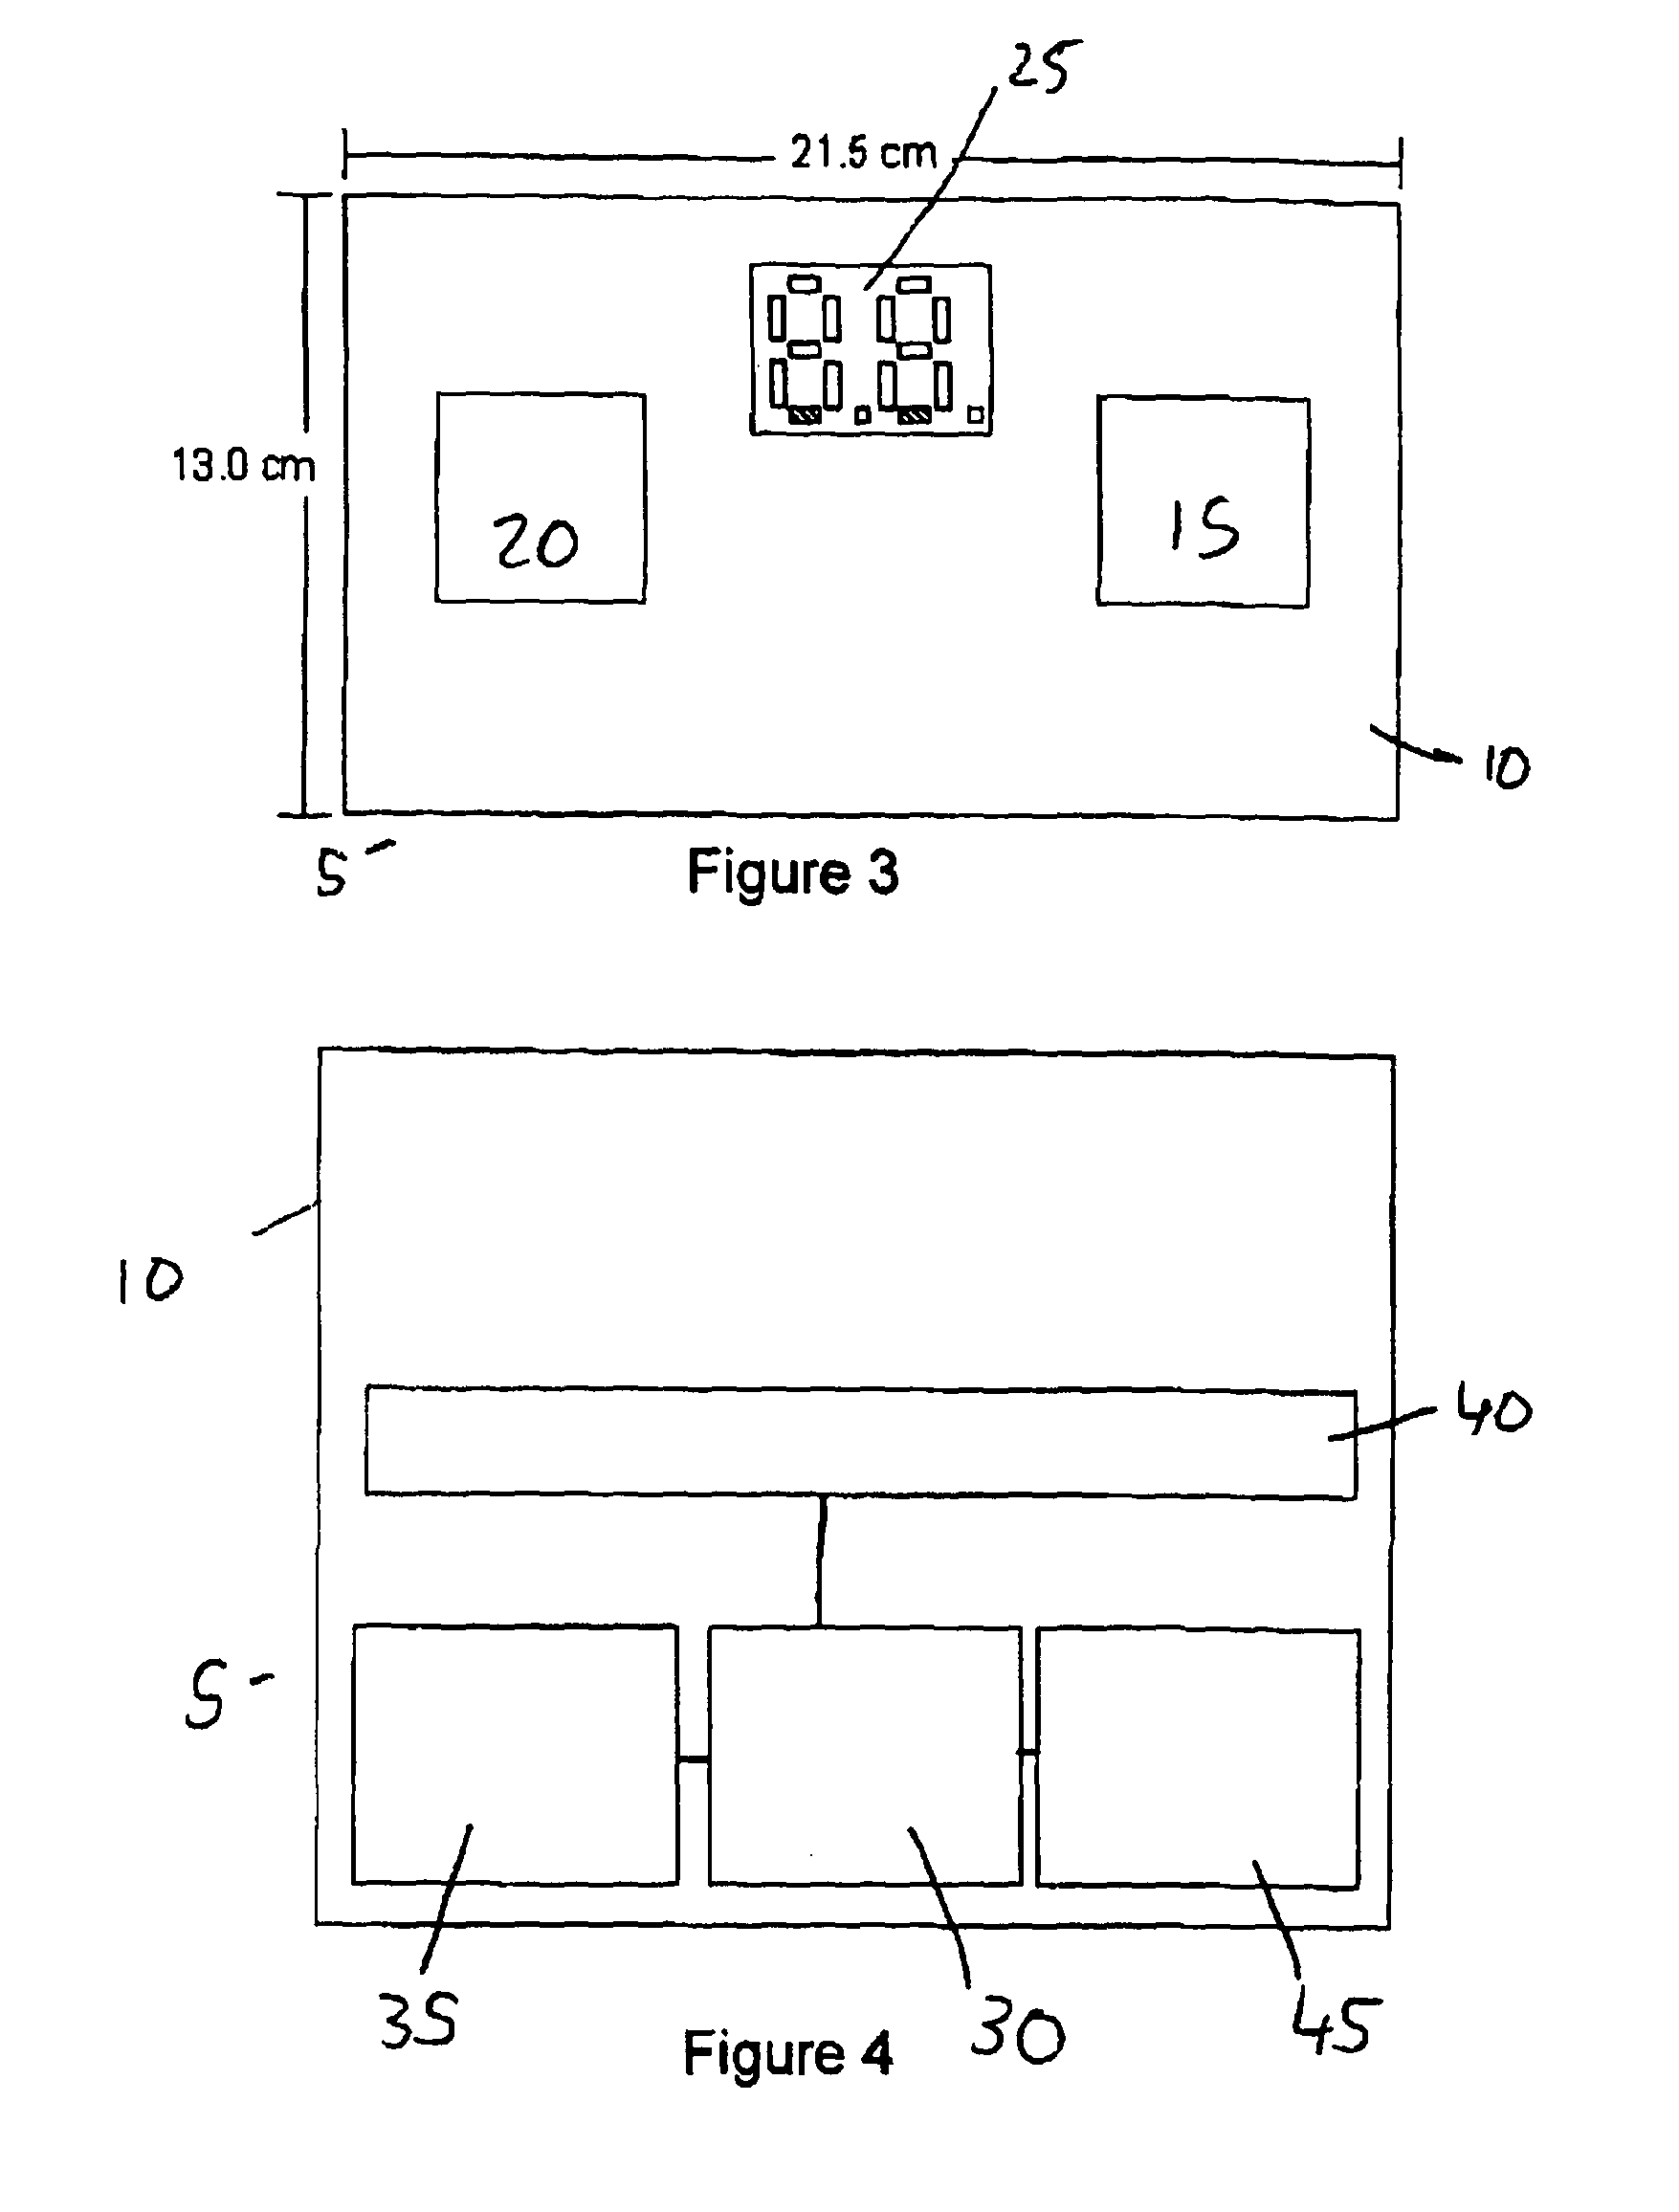 Apparatus and method for testing sustained attention and delerium